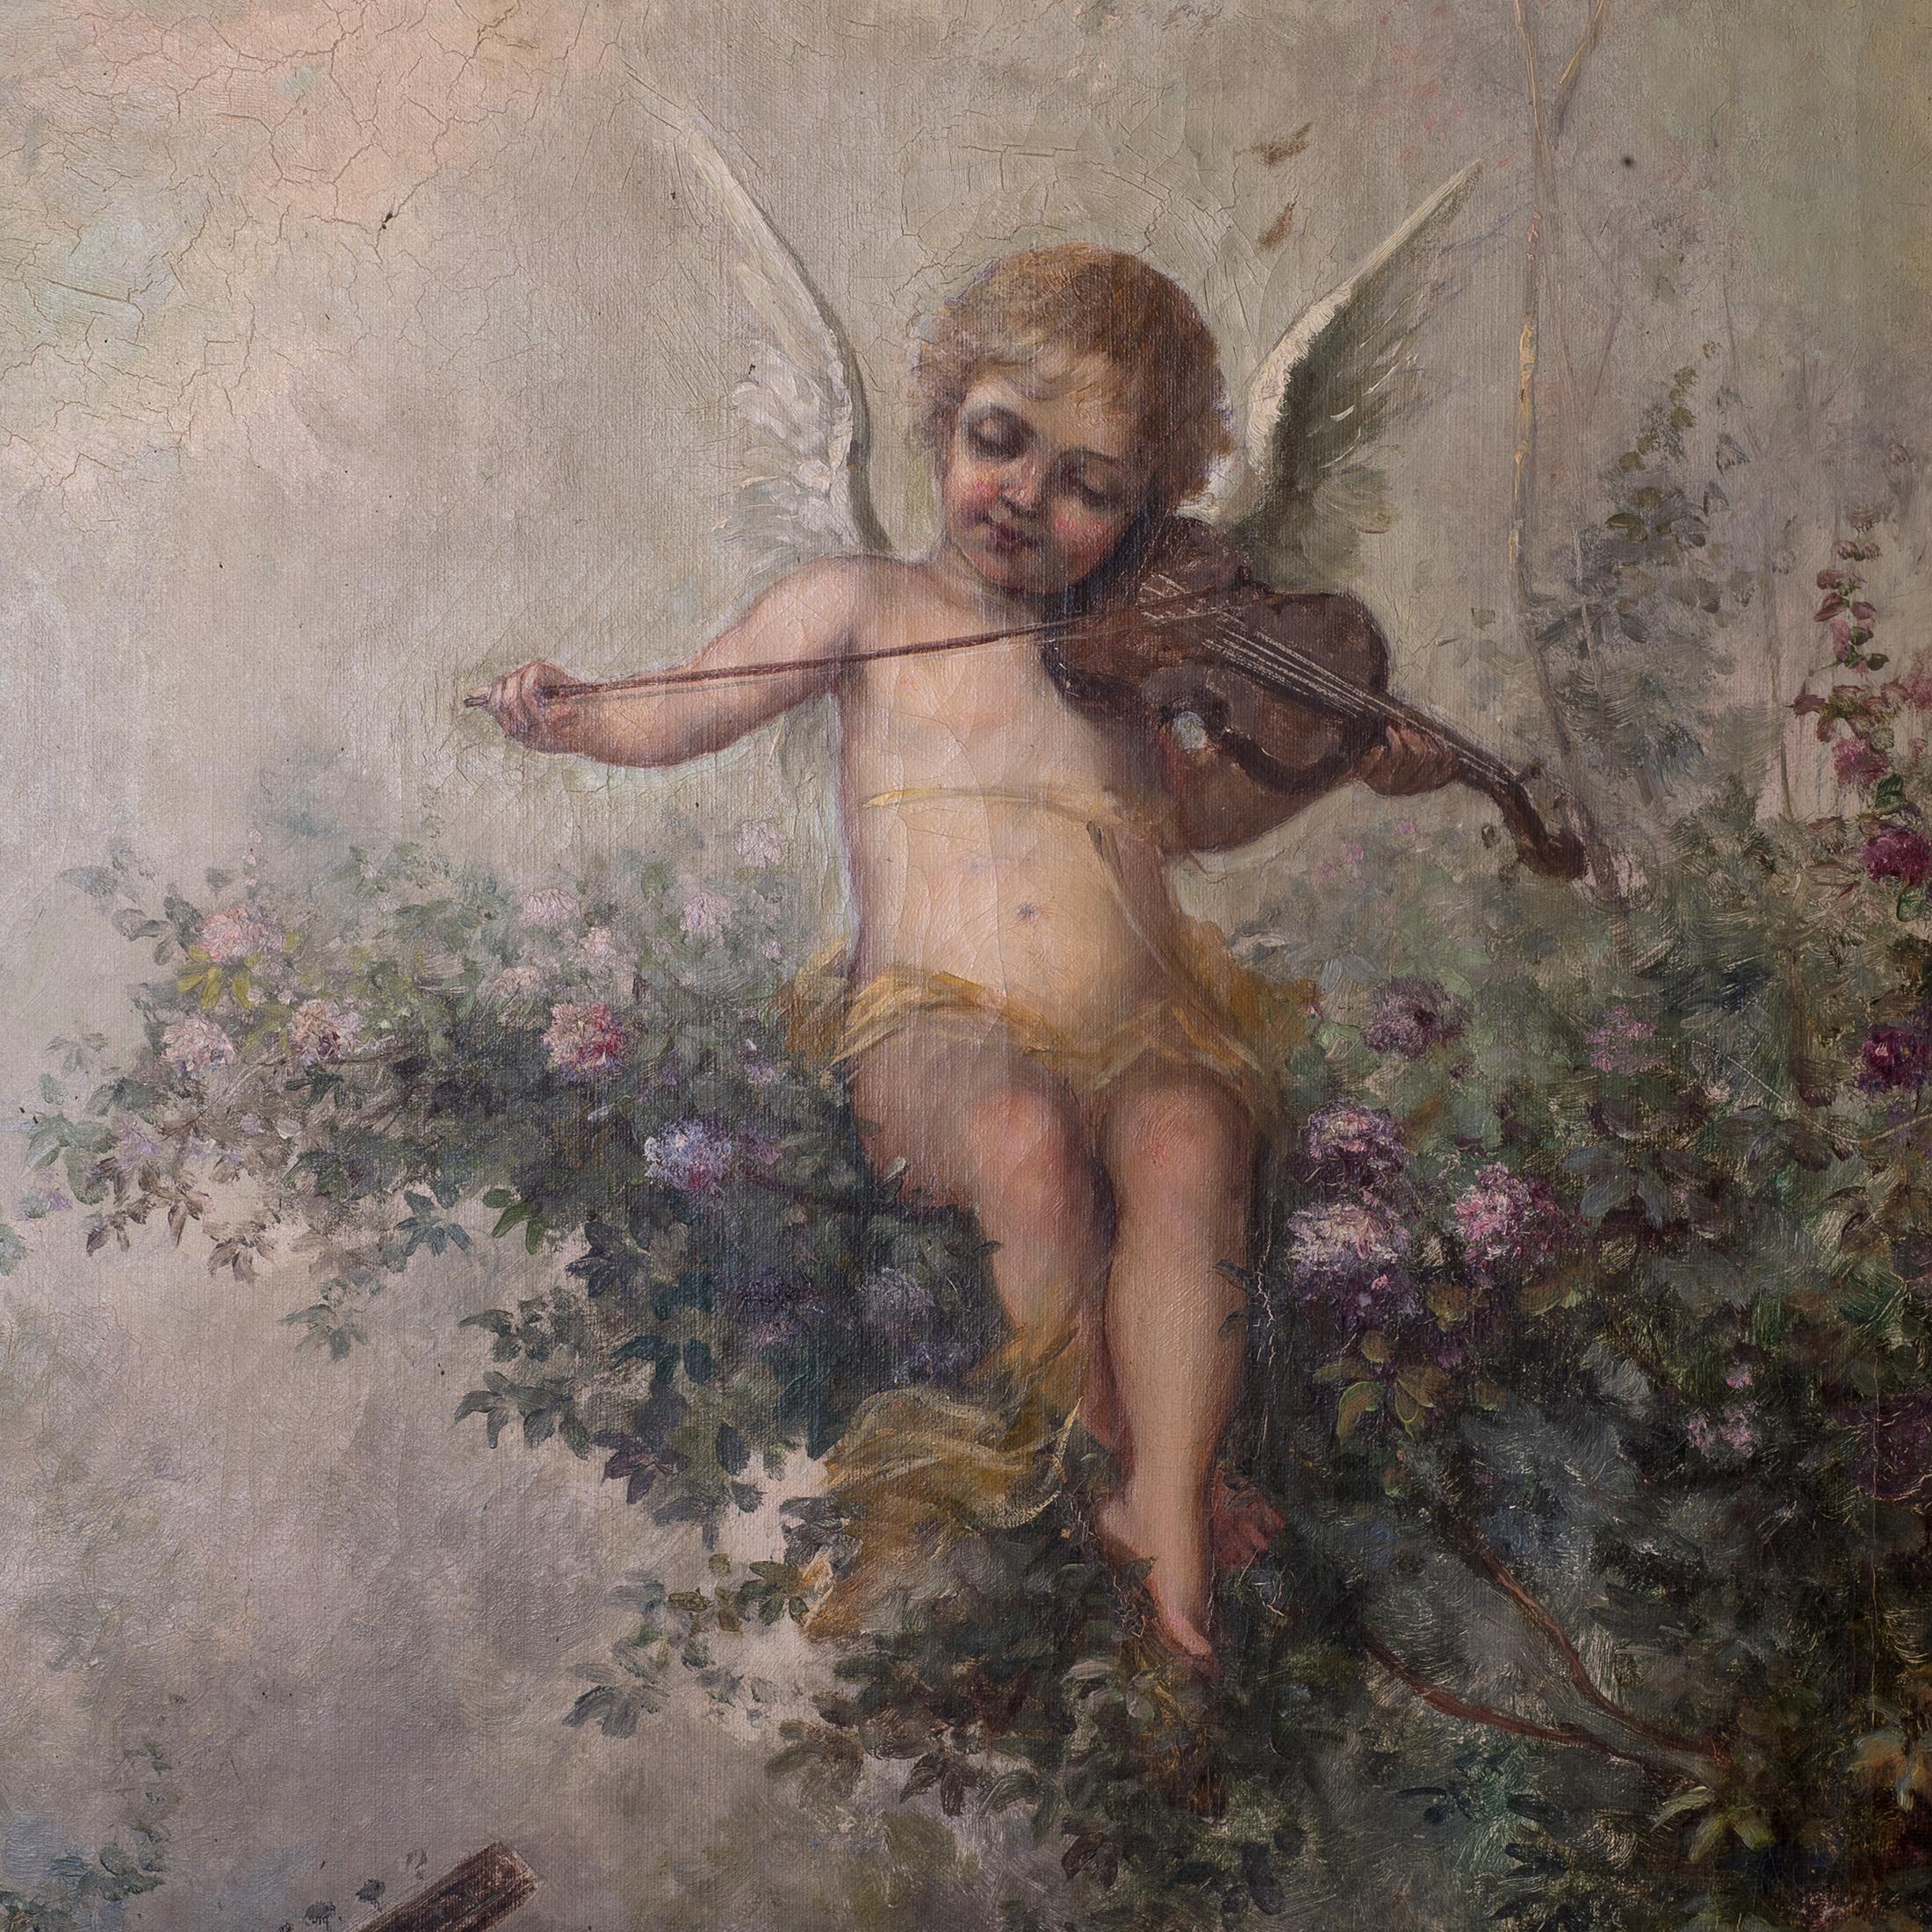 Beautiful Woman playing with putti in the garden.

Artist: Antonio Telser (1861-1942)
Date: 19th century
Origin: Austrian
Medium: Oil on wood
Dimension: 39 in. x 29 in. (Canvas), 51 in x 41 in (Framed)